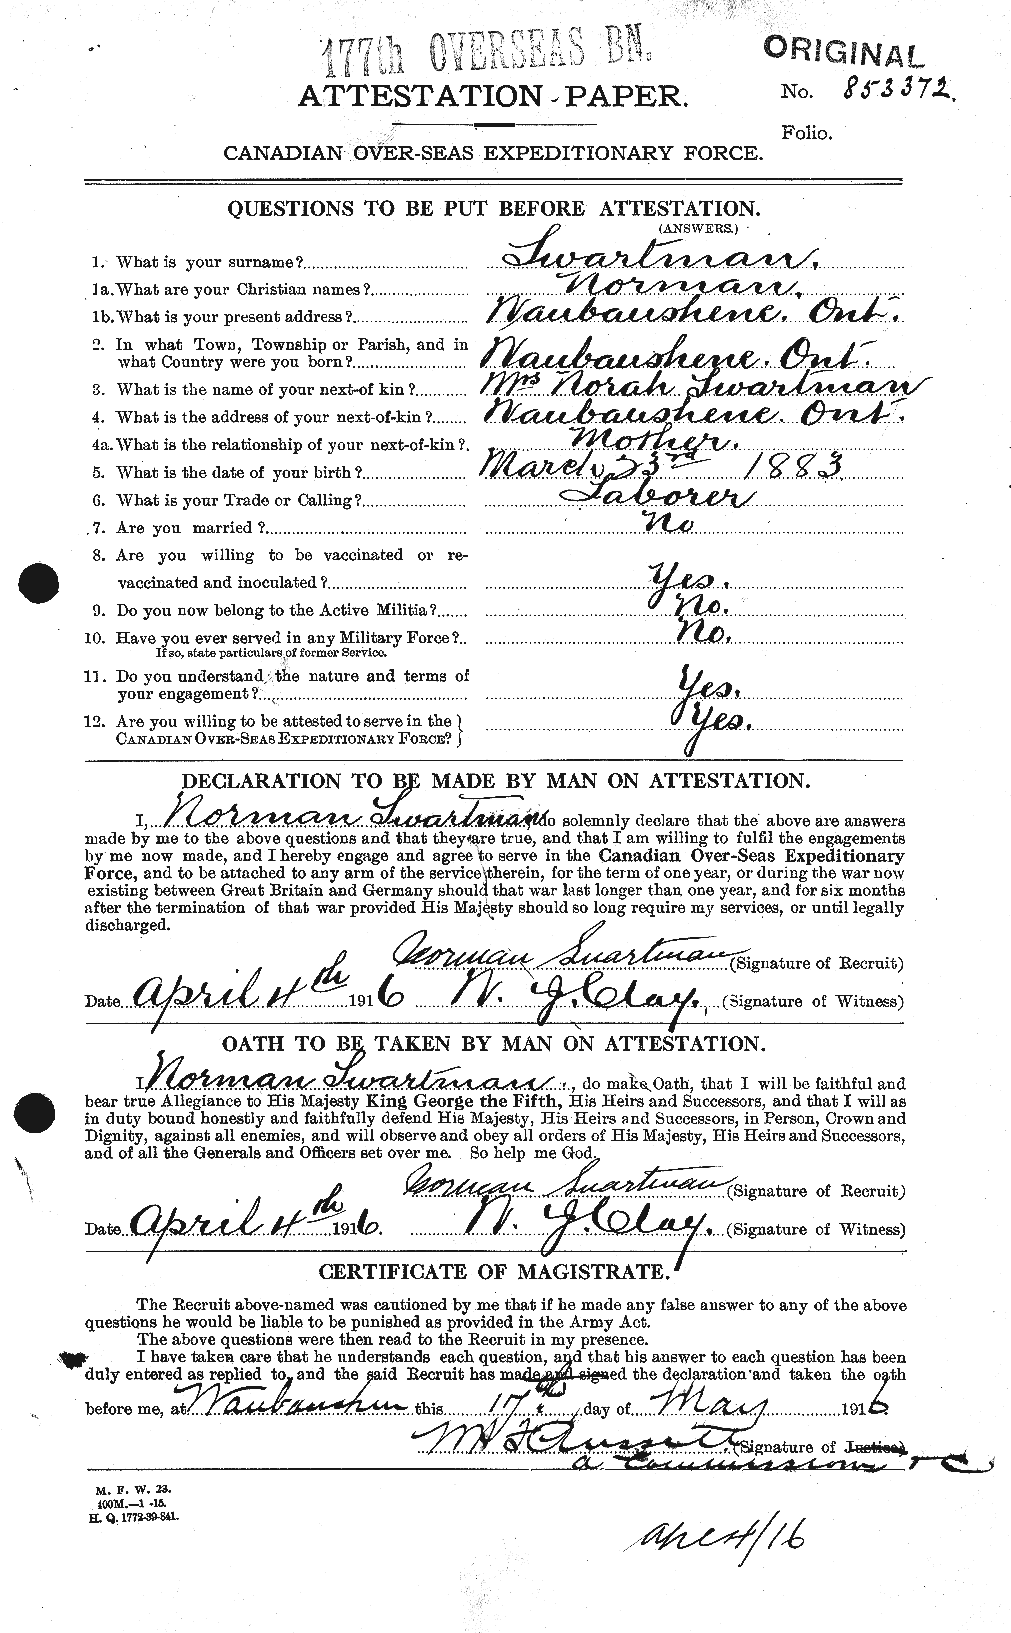 Personnel Records of the First World War - CEF 083811a